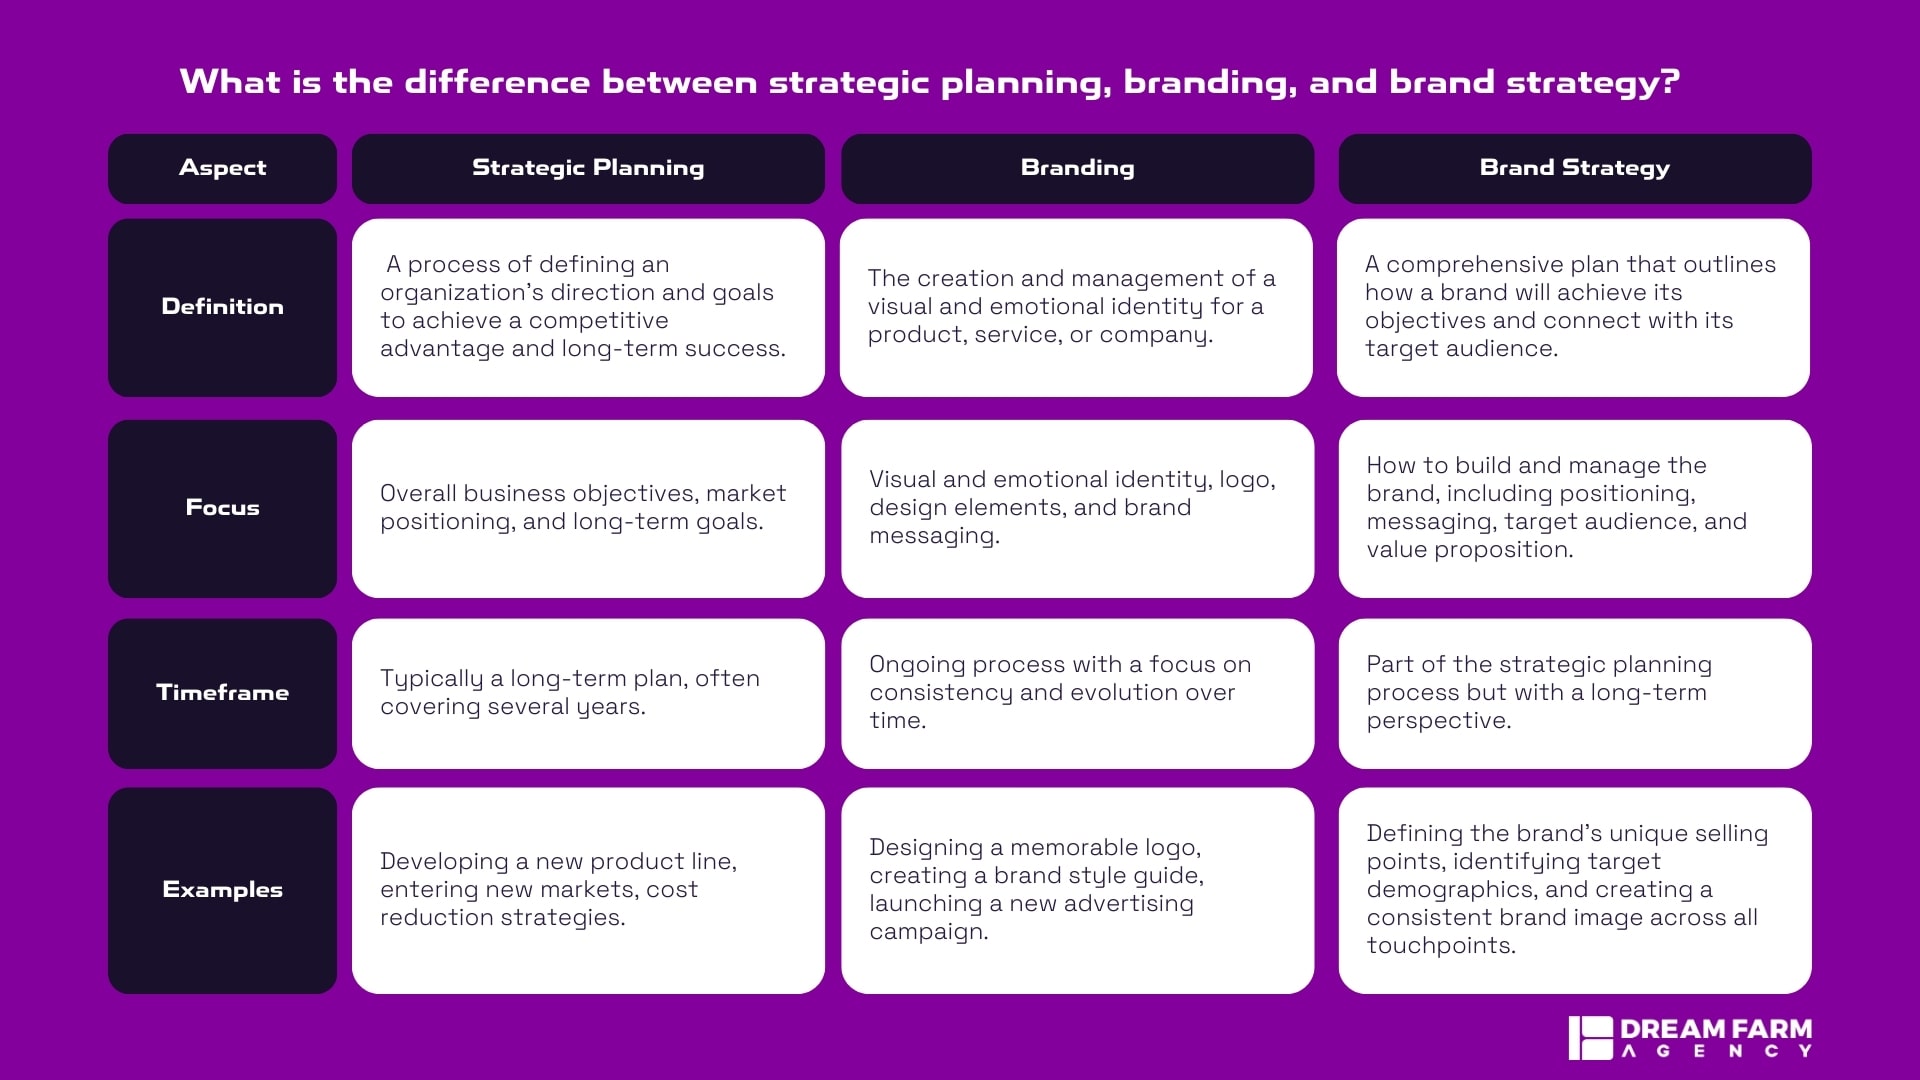 What is the difference between strategic planning, branding, and brand strategy